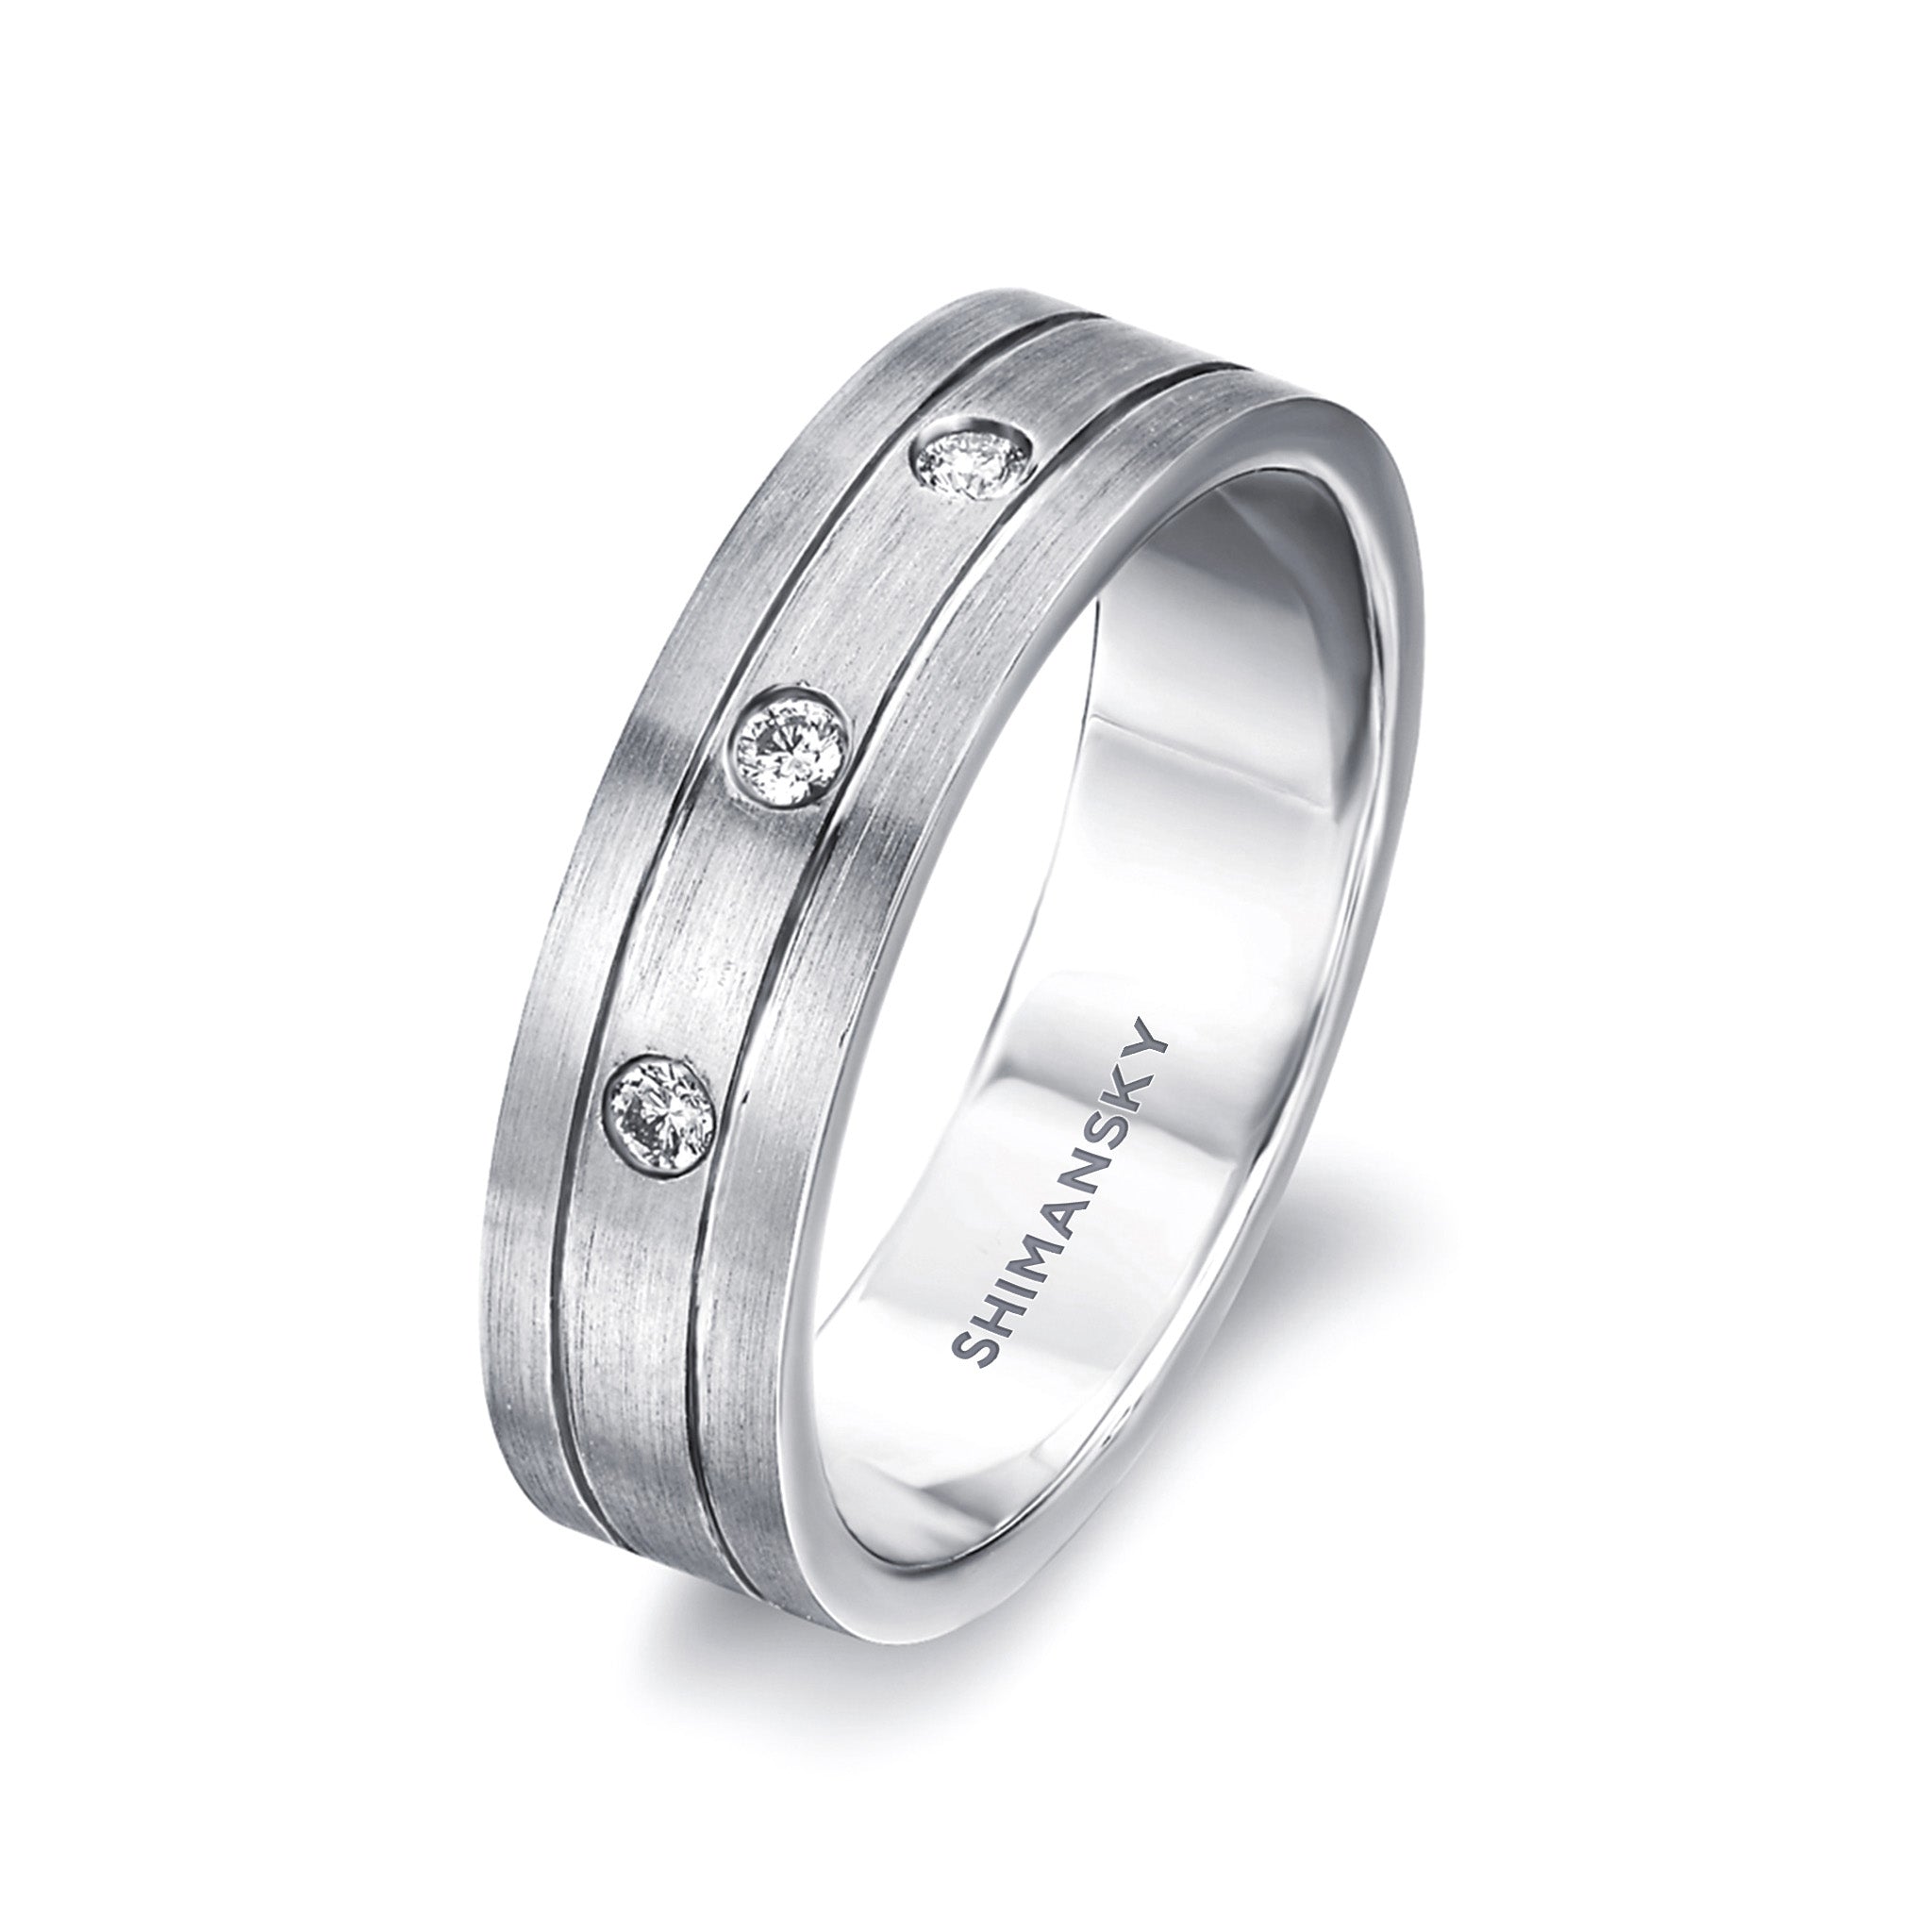 Shimansky - Max-Line Trio Diamond Wedding Band Crafted in Brushed Platinum